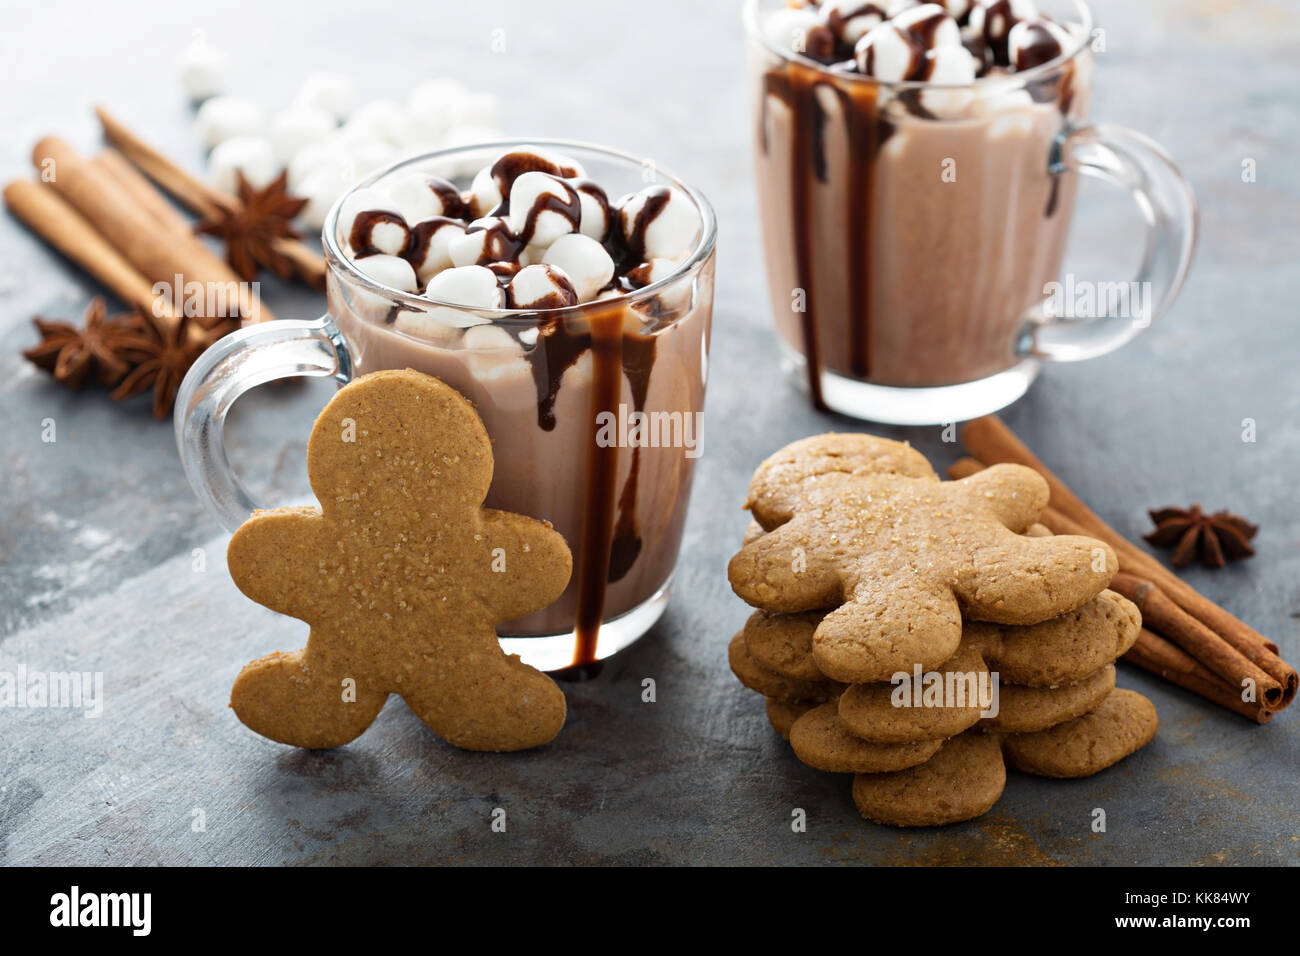 Gingerbread men cookies and hot chocolate Stock Photo